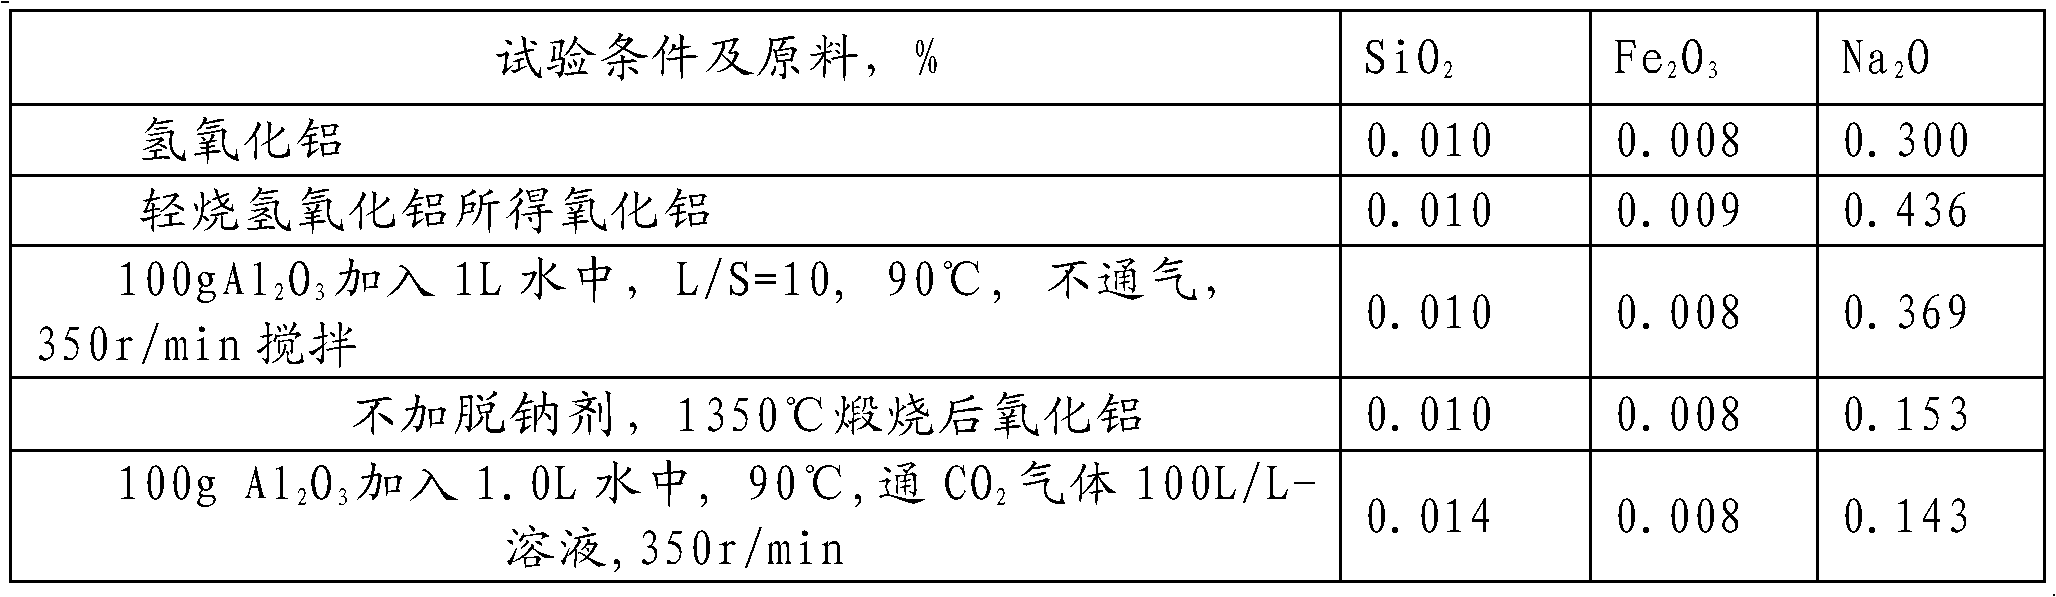 Method for reducing sodium oxide in aluminum oxide by using carbon dioxide